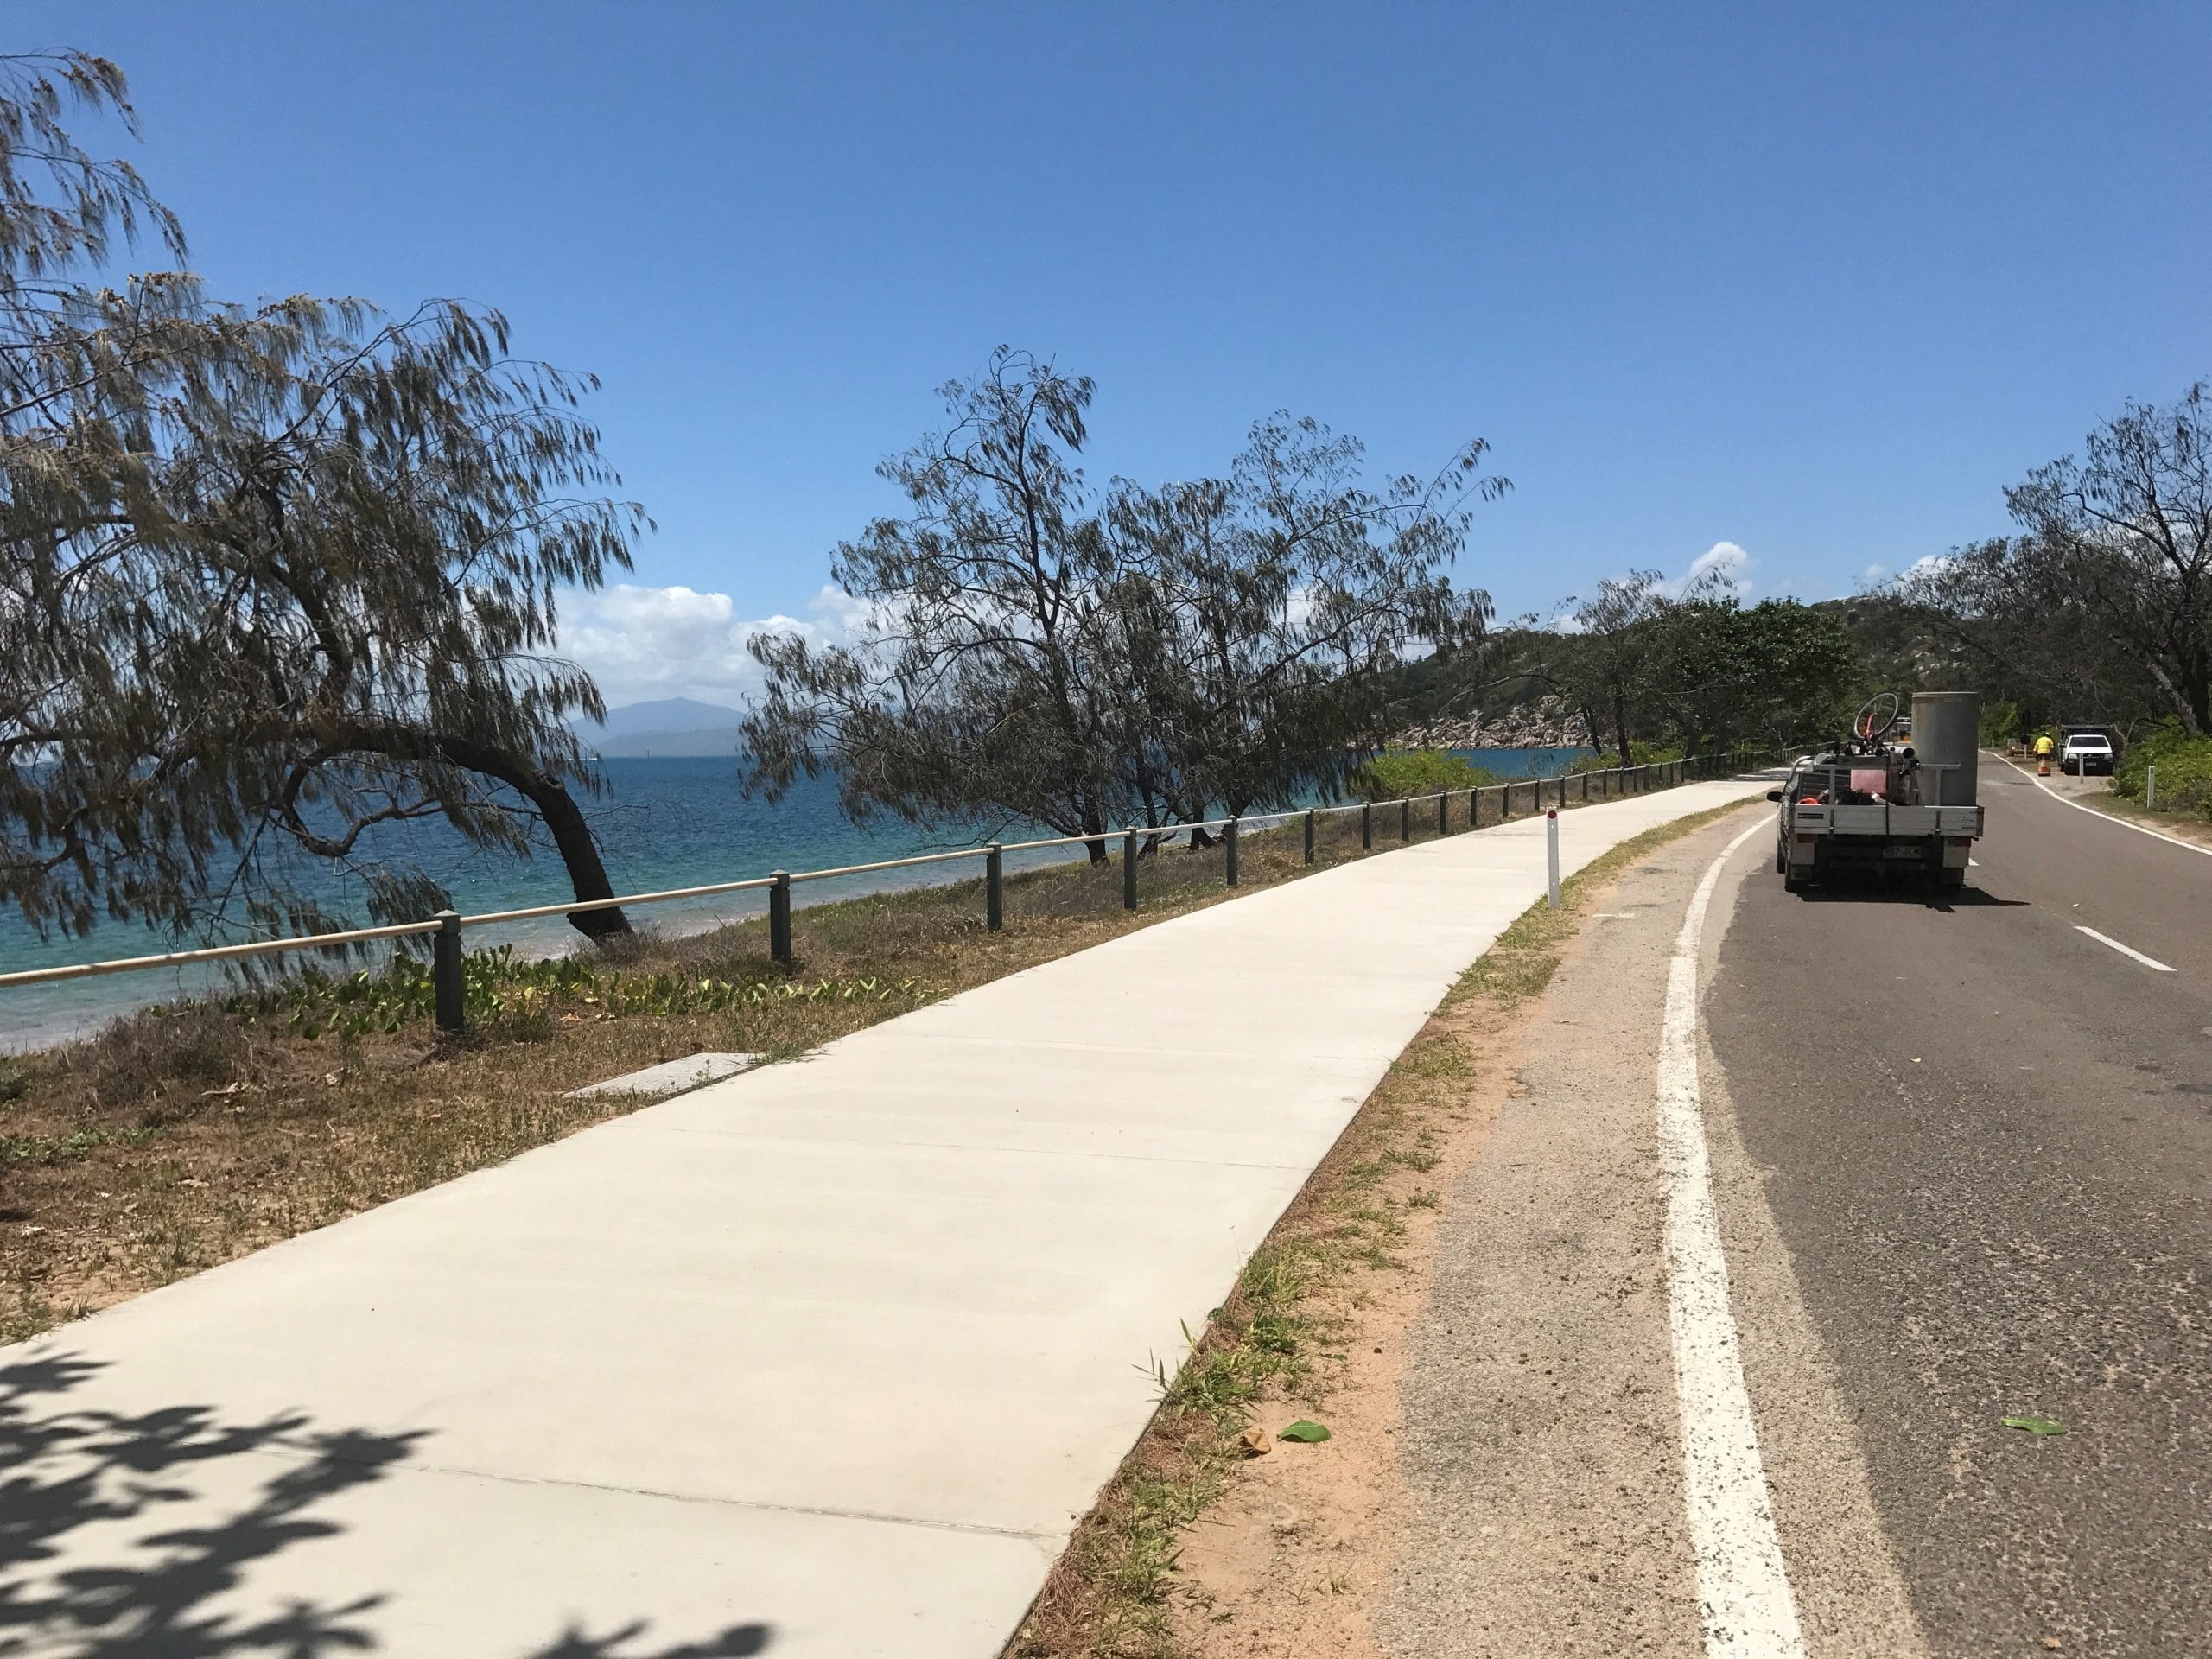 Magnetic Island Shared Pathway